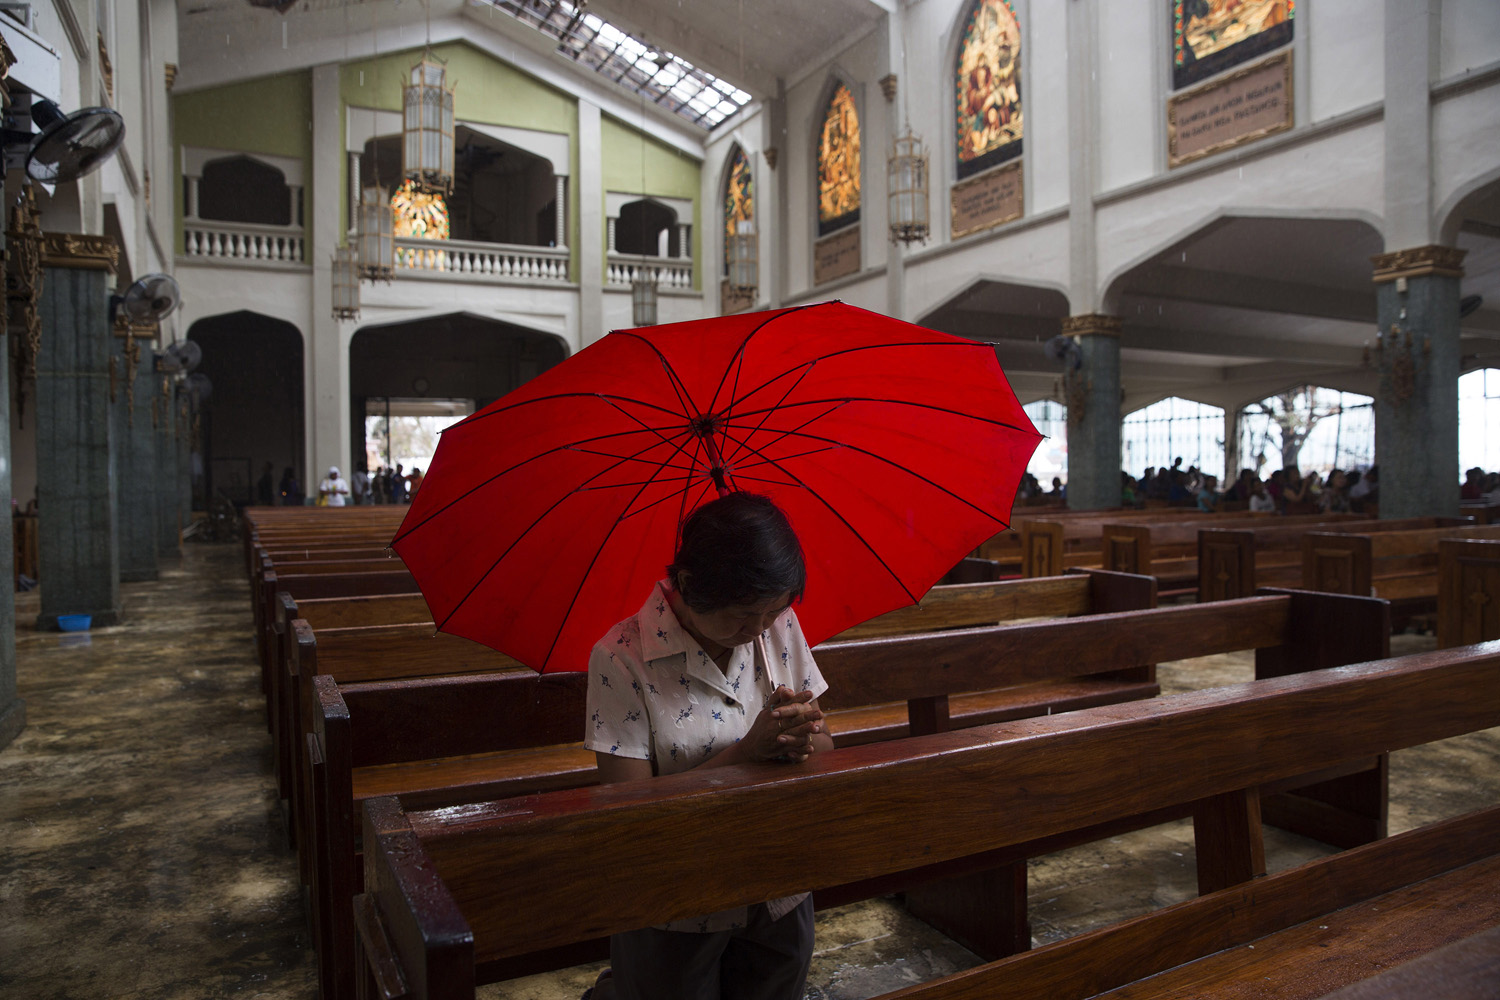 A woman preys during mass with an umbrella to protect herself from the rain coming in through the Santo Nino Church roof that was damaged by Haiyan Typhoon in Tacloban, The Philippines on November 17, 2013.